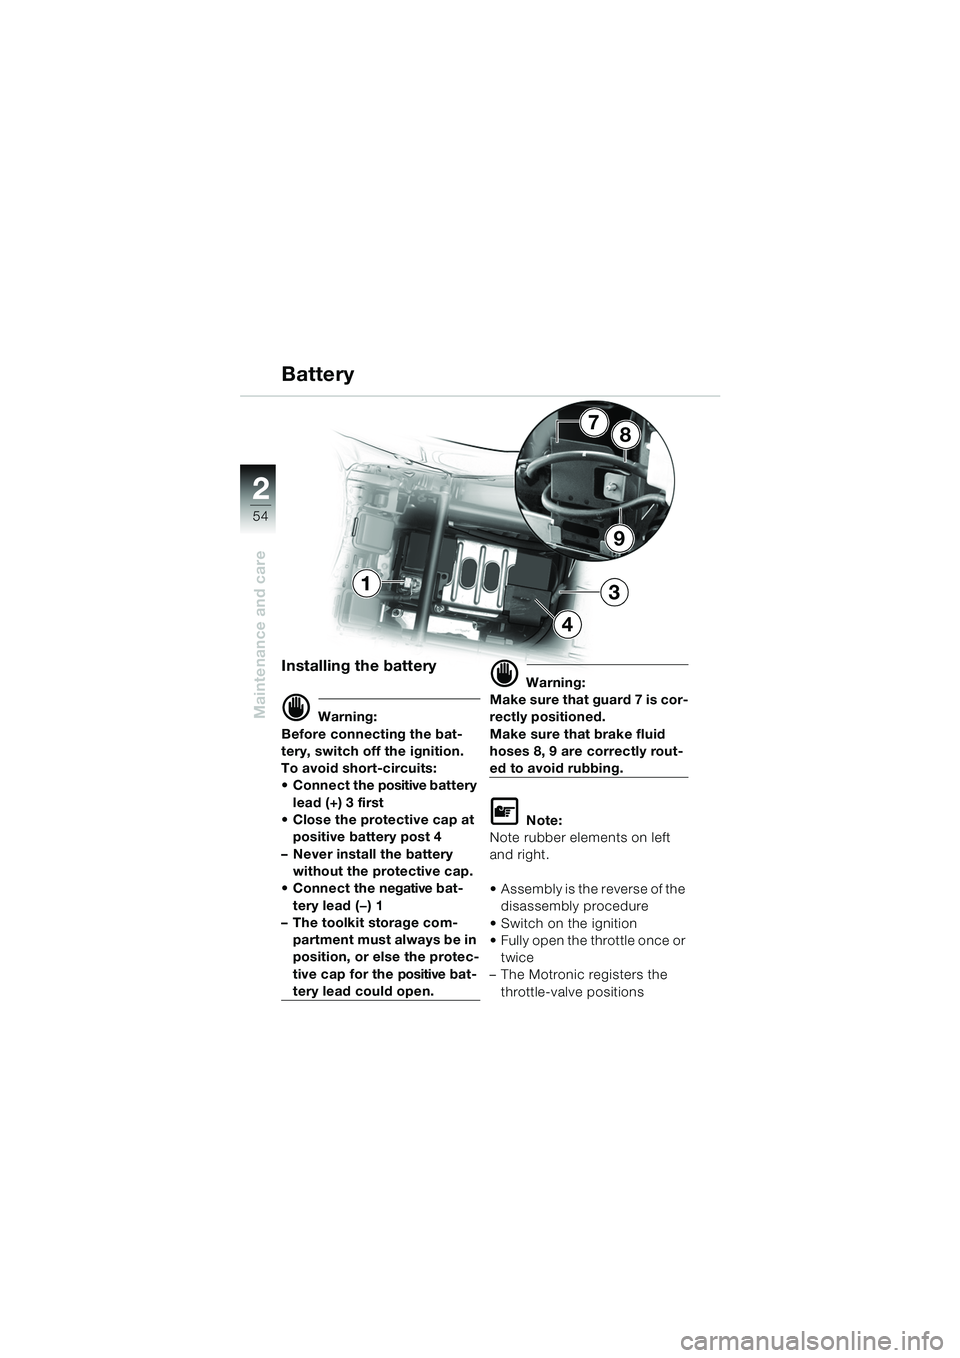 BMW MOTORRAD K 1200 RS 2004  Riders Manual (in English) 54
Maintenance and care
2
9
87
1
4
3
Battery
Installing the battery
d Warning:
Before connecting the bat-
tery, switch off the ignition.
To avoid short-circuits:
 Connect the positive battery  lead (